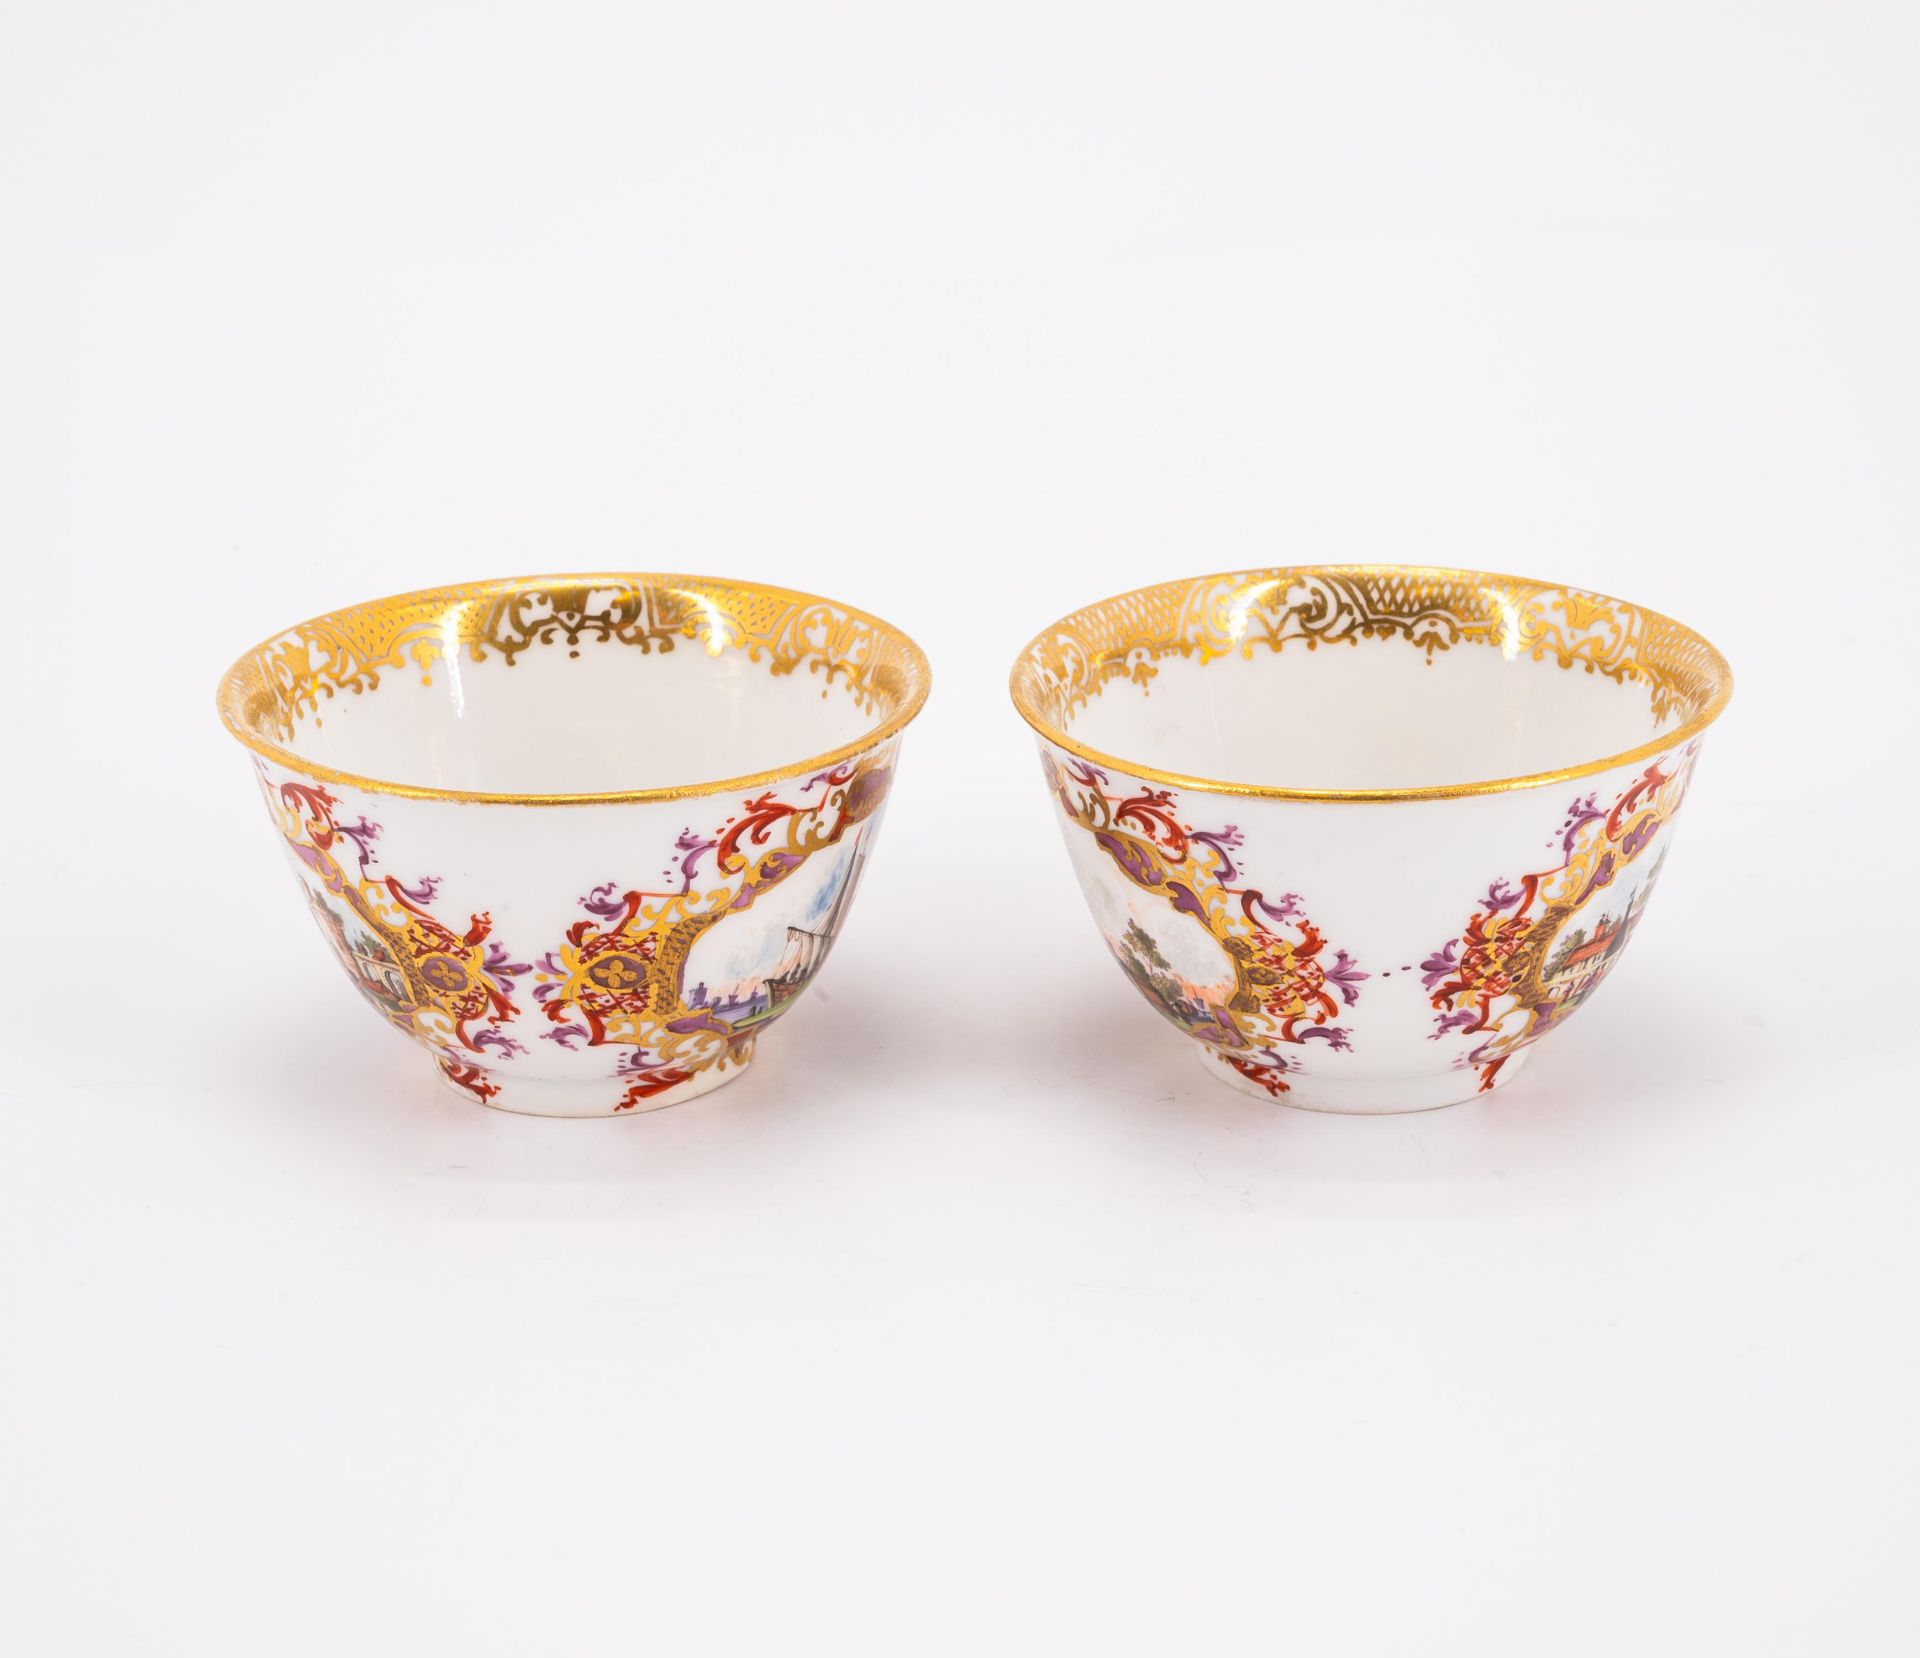 Meissen: PAIR OF PORCELAIN TEA BOWLS AND SAUCERS WITH MERCHANT NAVY SCENES - Image 4 of 8